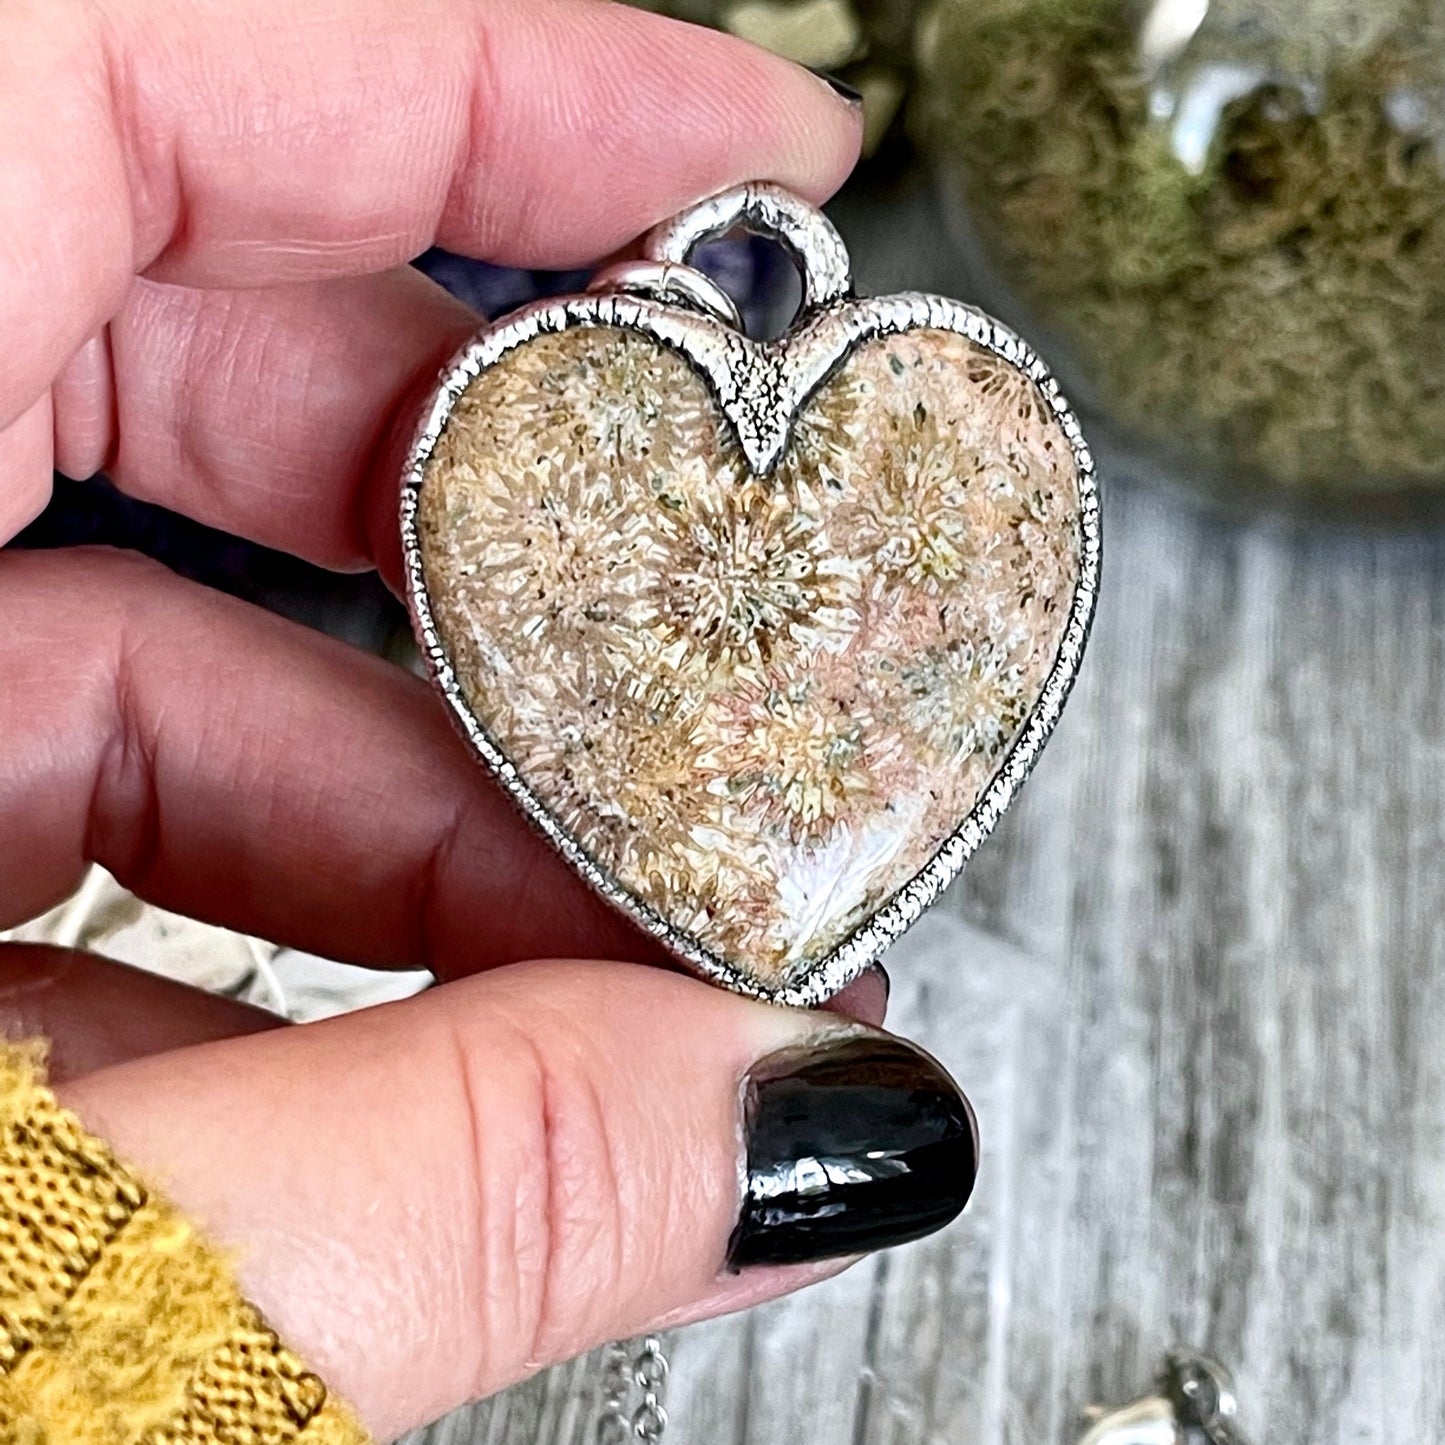 Bohemian Jewelry, Crystal Heart, Crystal Jewelry, Crystal Necklace, Crystal Necklaces, Crystal pendant, Etsy ID: 1319002491, Fossilized Palm Root, FOXLARK- NECKLACES, Goth Jewelry, Healing Crystal, Heart Necklace, Jewelry, Jewelry For Woman, Necklaces, St